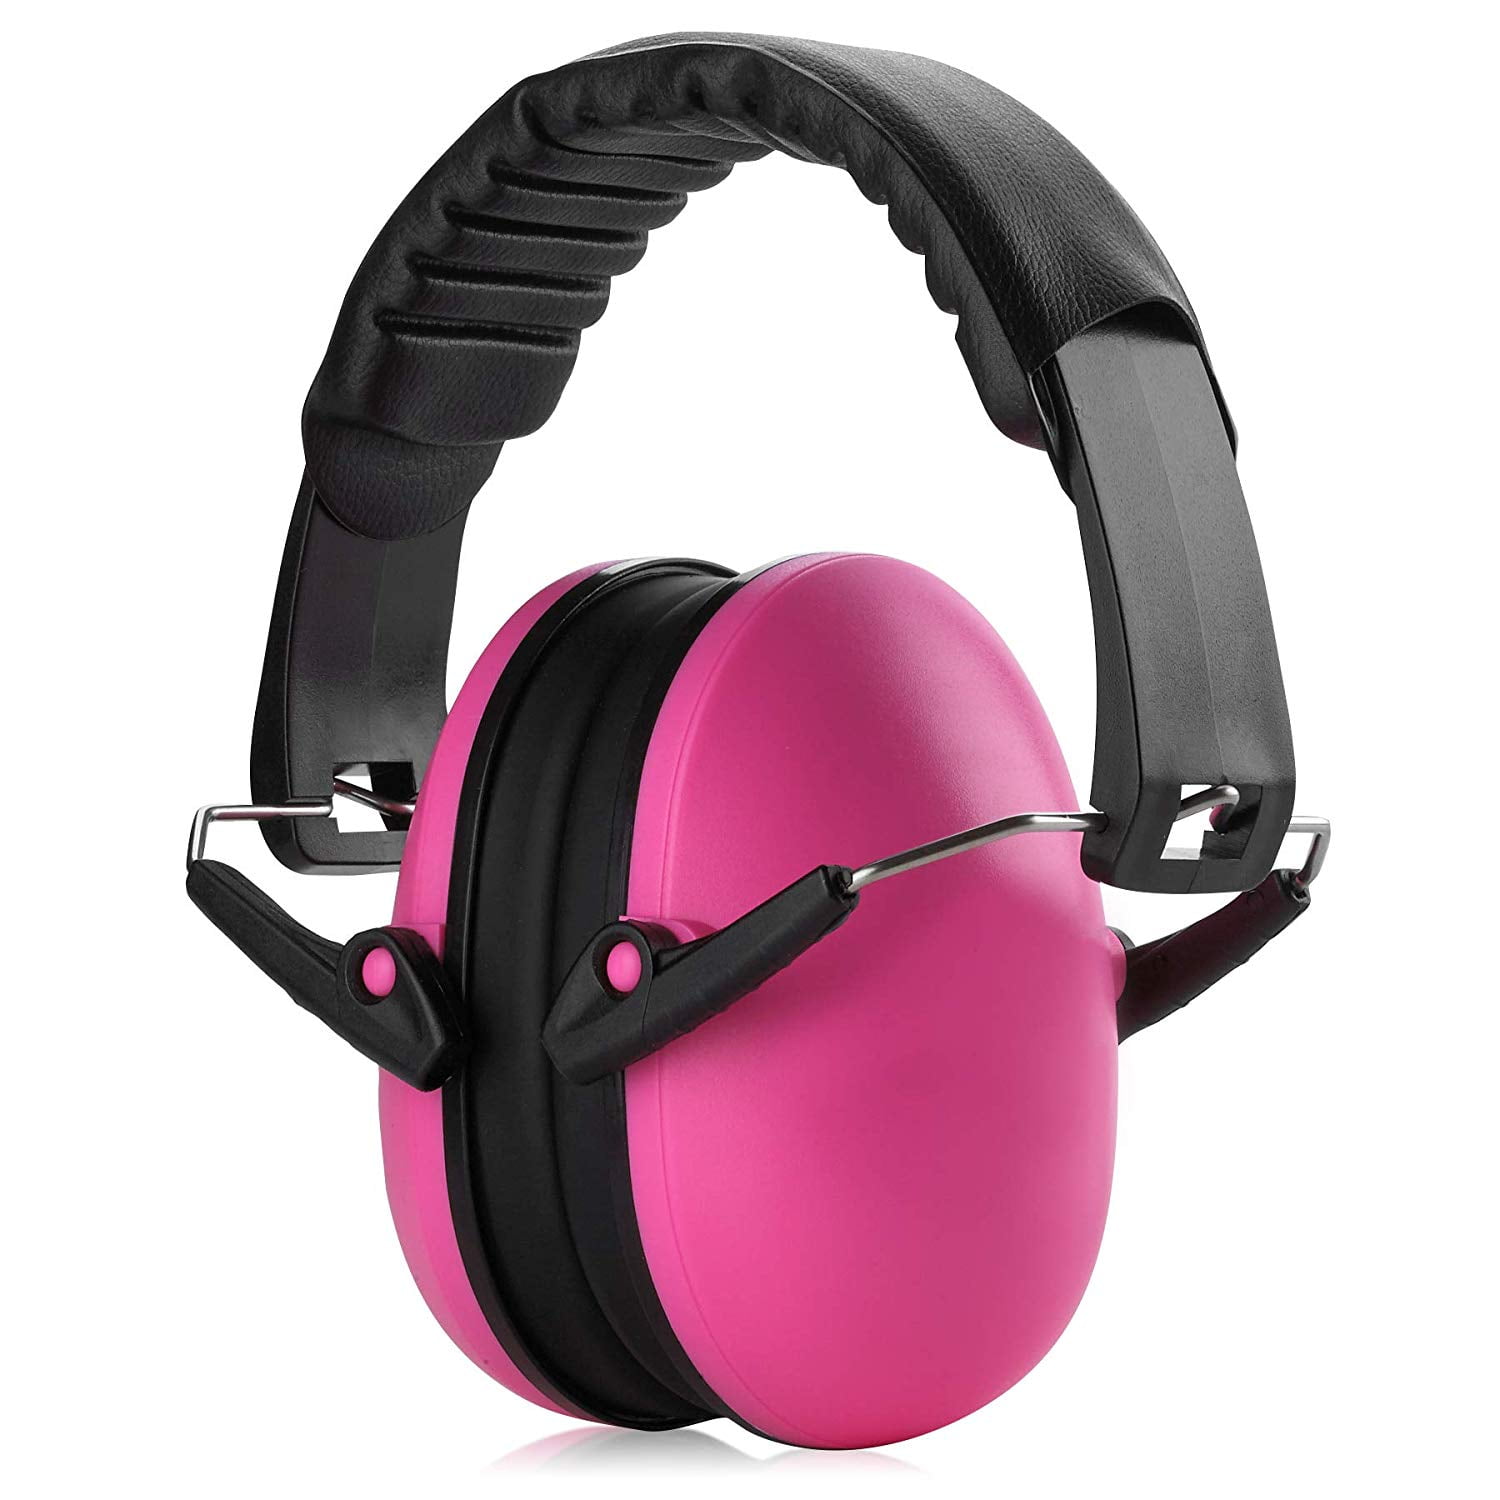 Ear Muff Hearing Protection Safety Hunting Shooting Range Work Industrial 